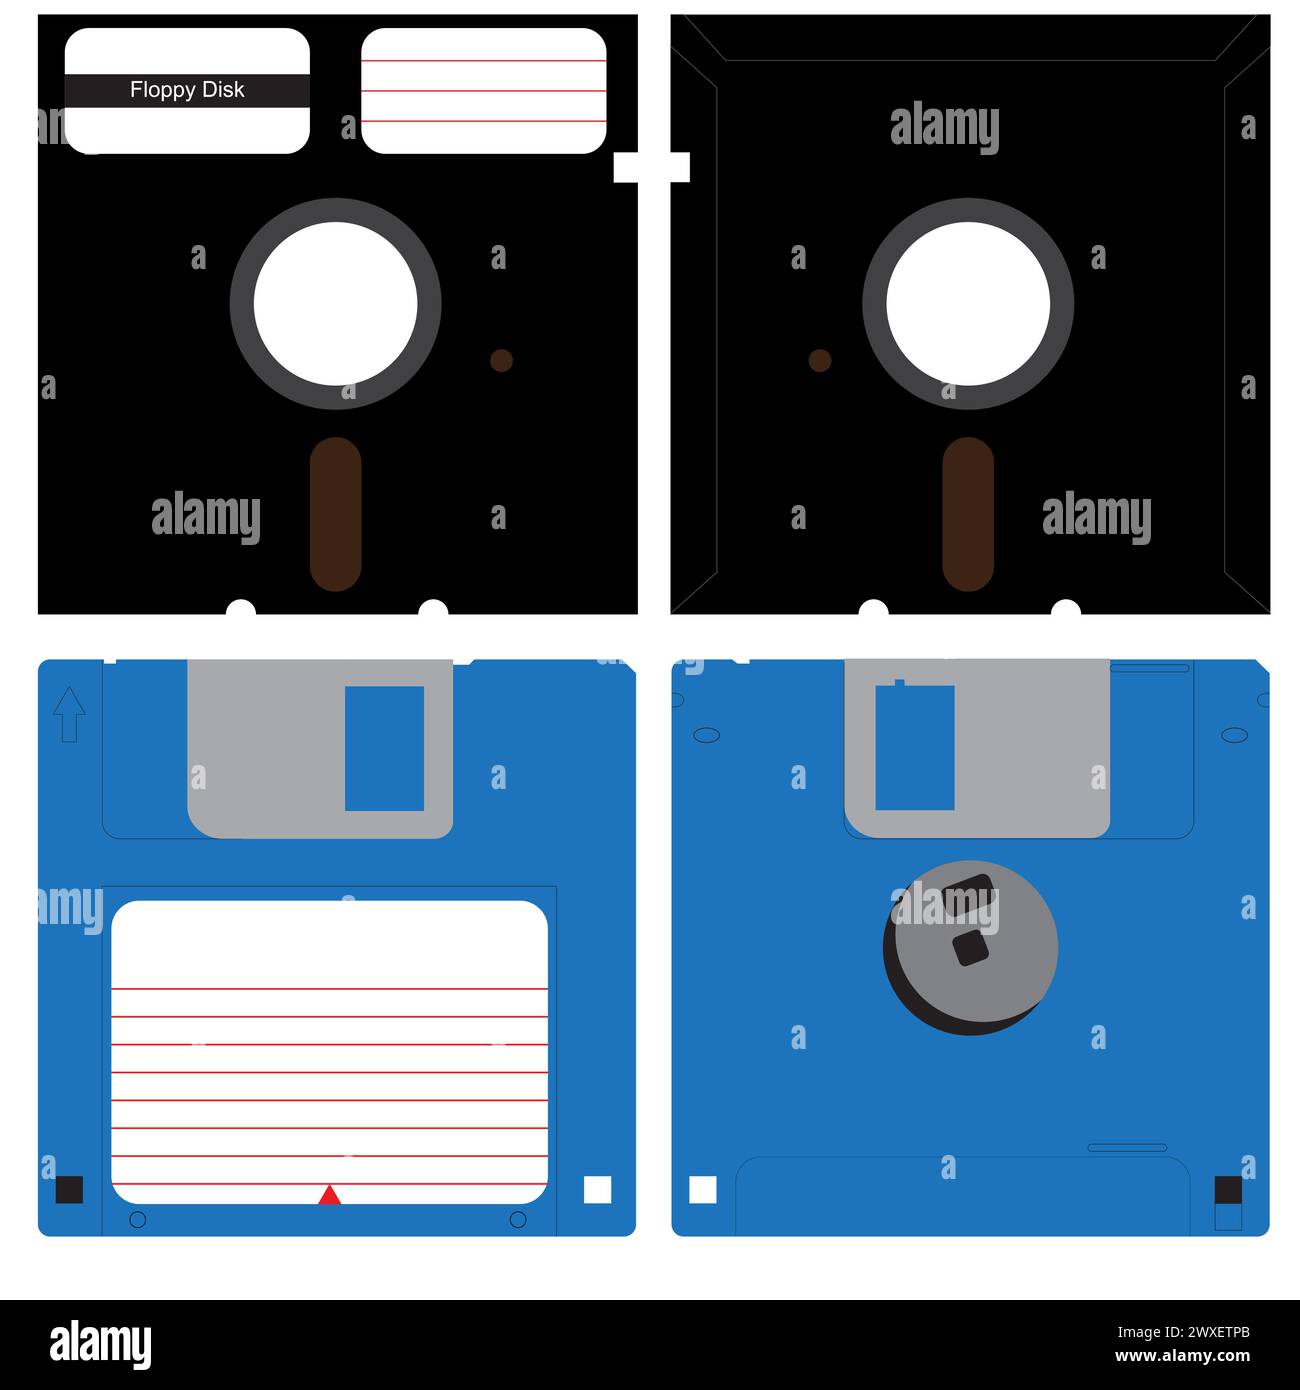 Set of floppy discs in both 3.5 and 5.25 inch versions, 3 ½ and 5.25 floppy disk storage, Retro Storage Mediums Stock Vector